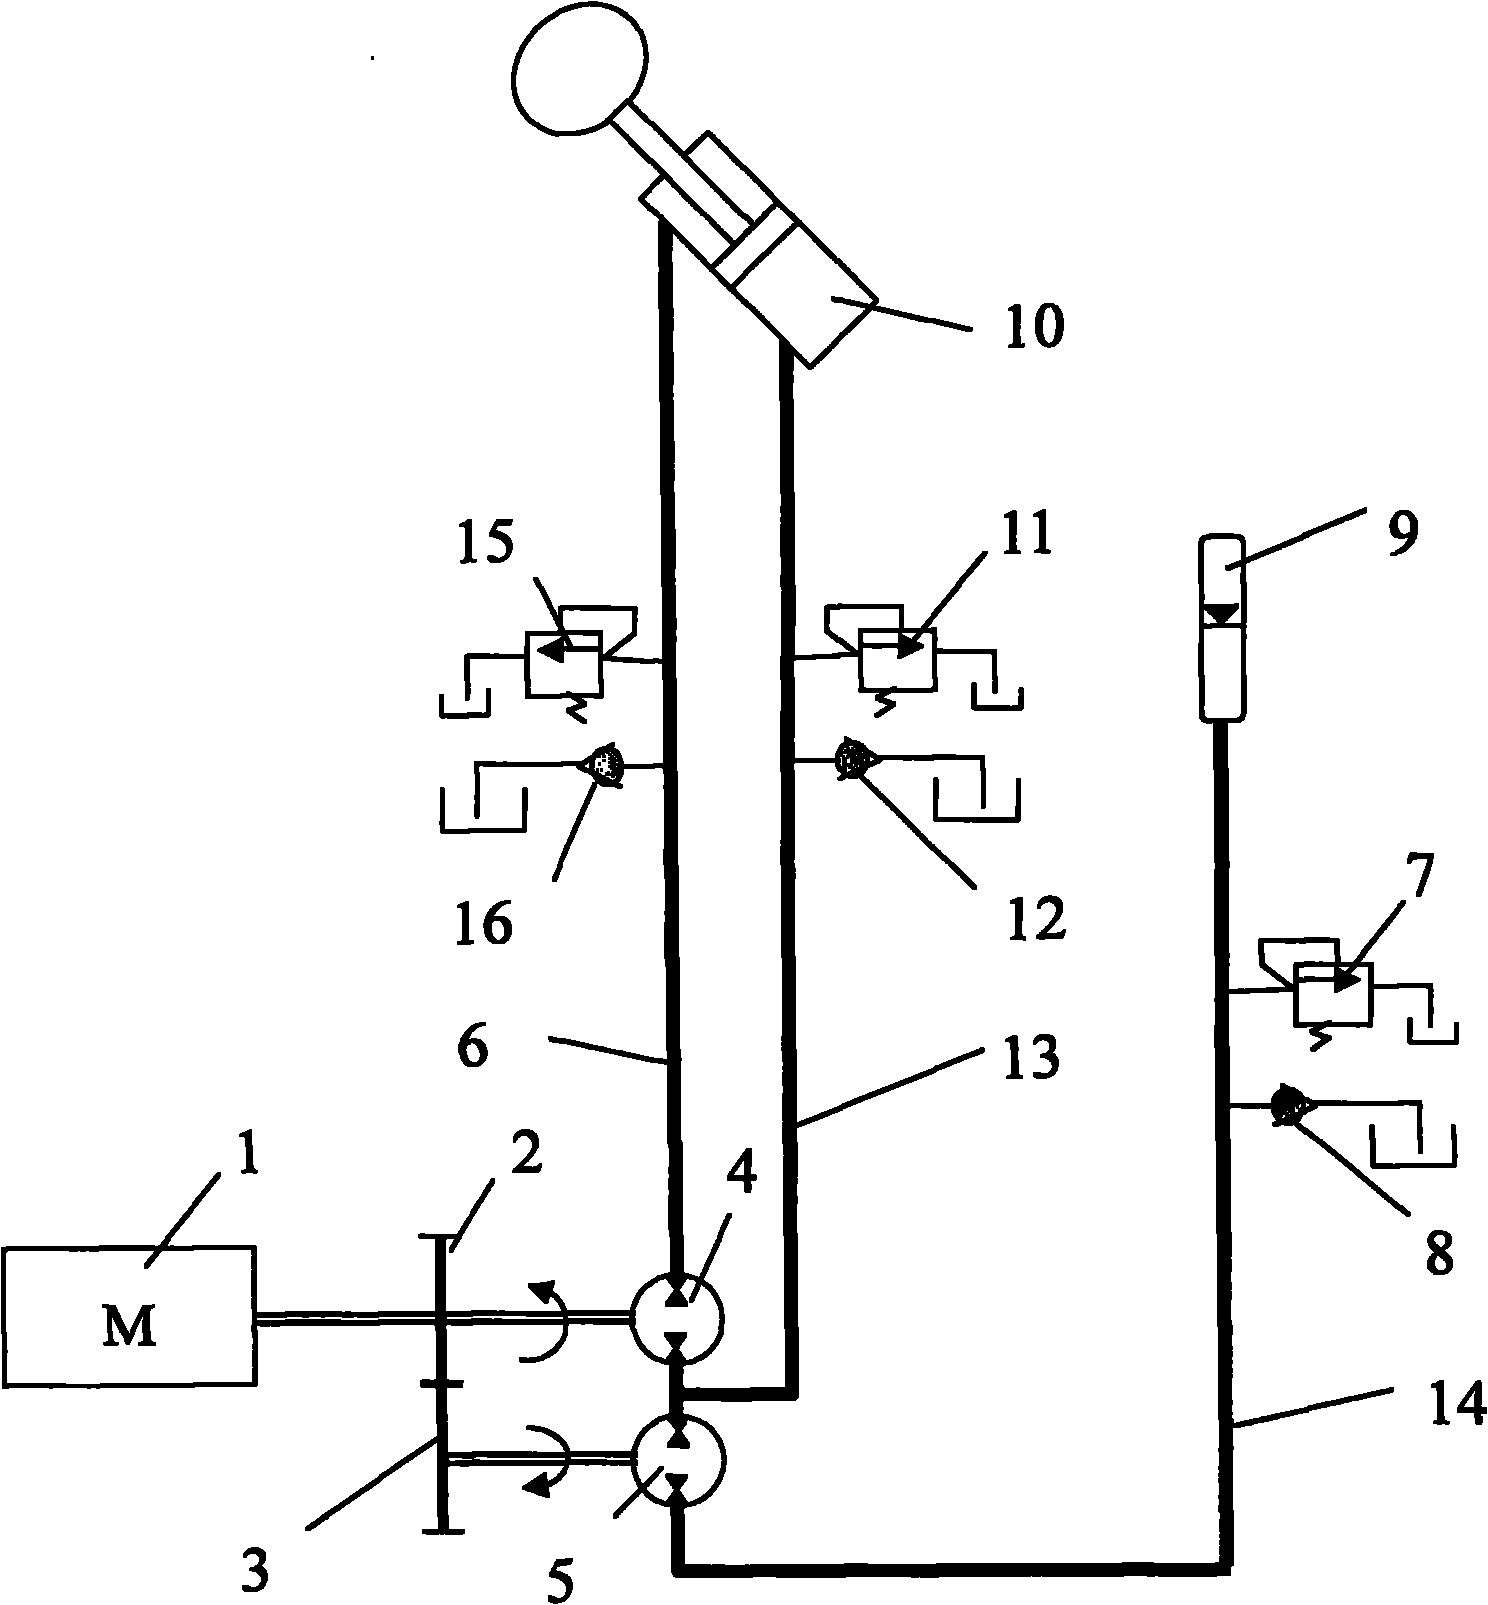 Gravitational potential energy recovery device during descending of engineering machinery movable arm